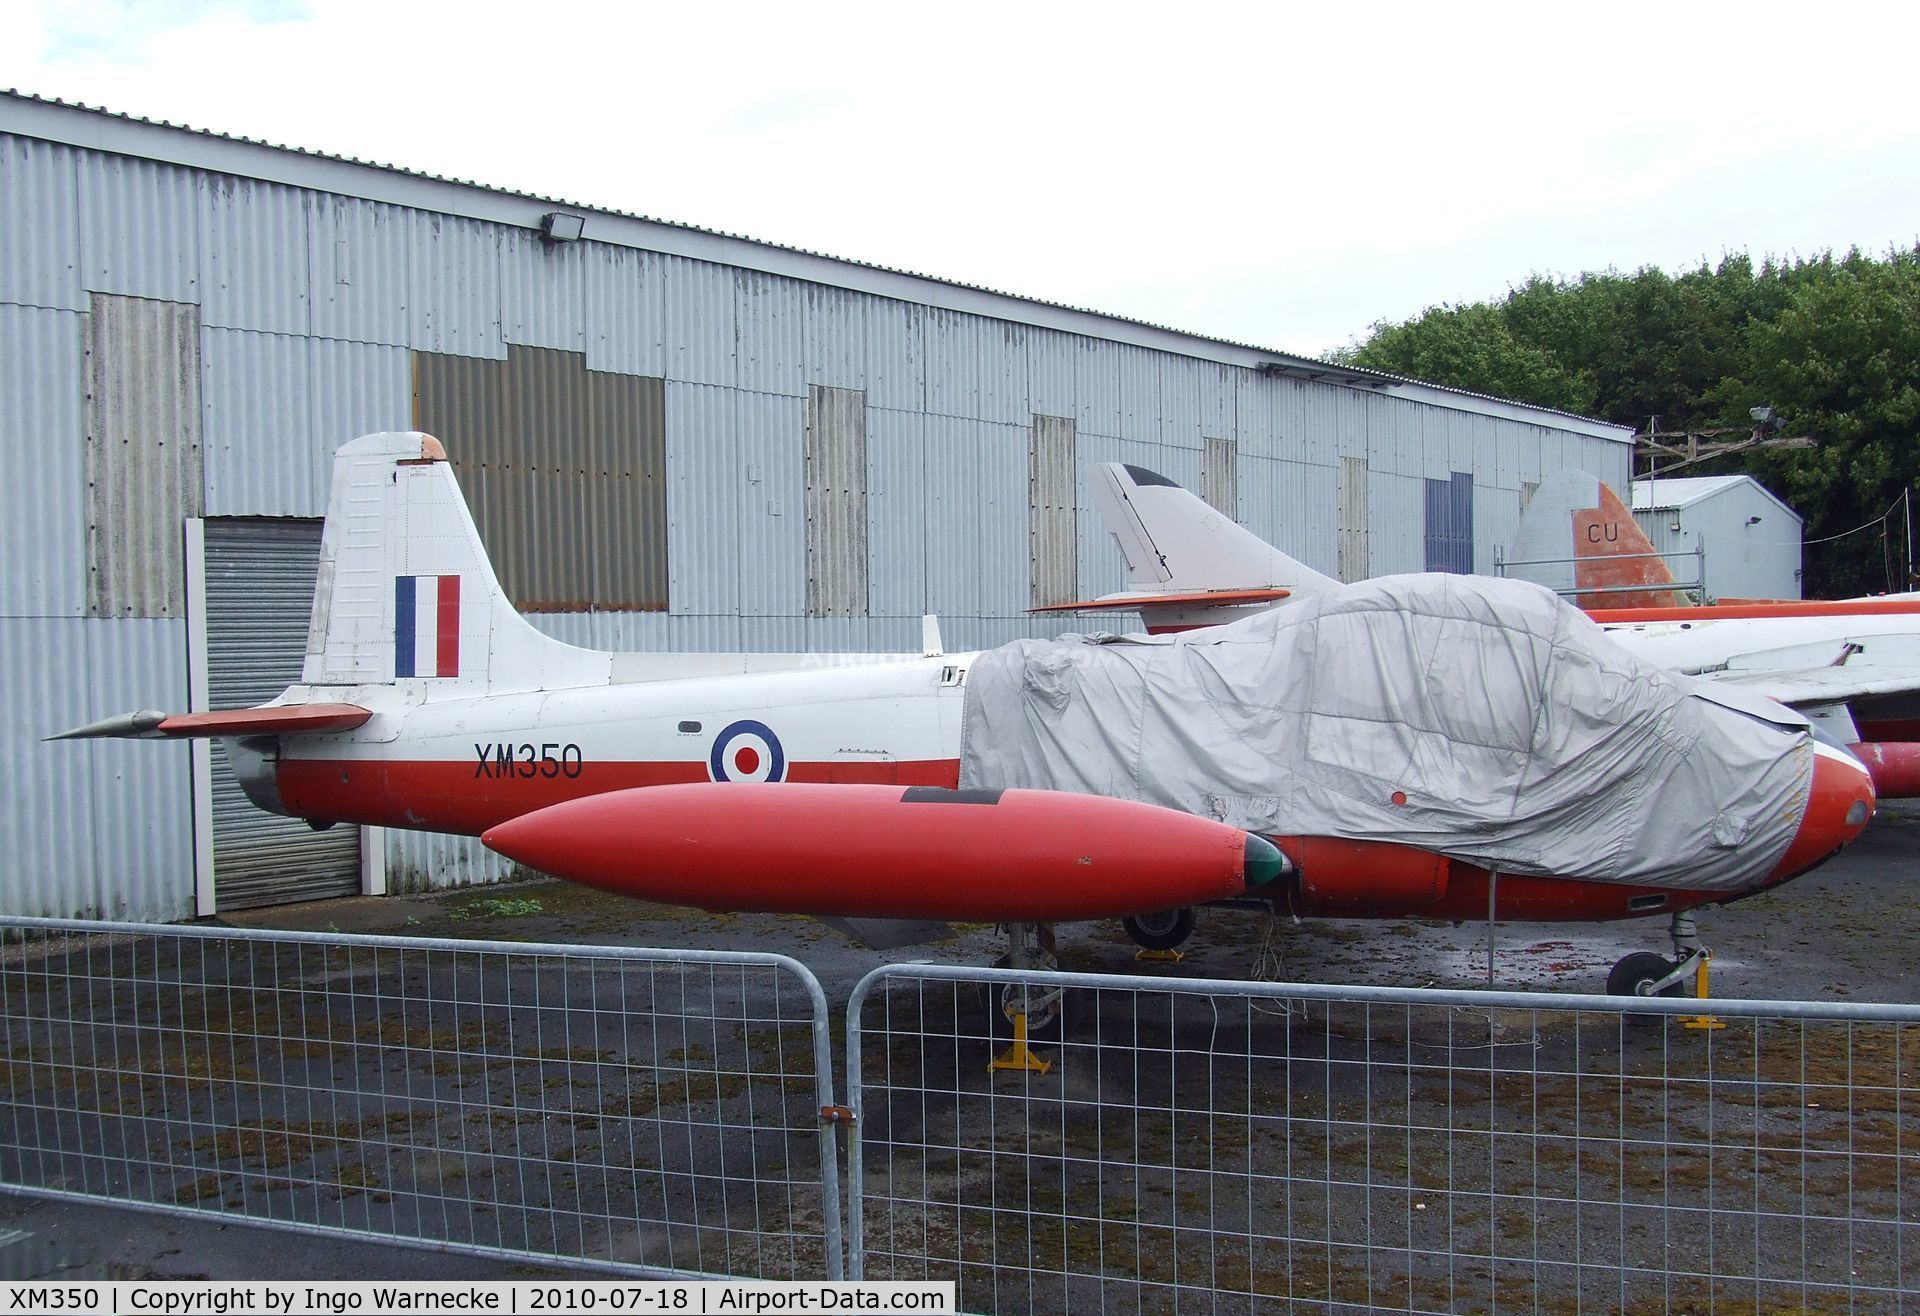 XM350, 1959 Hunting P-84 Jet Provost T.3A C/N PAC/W/6307, Hunting Jet Provost T.3A at the AeroVenture, Doncaster